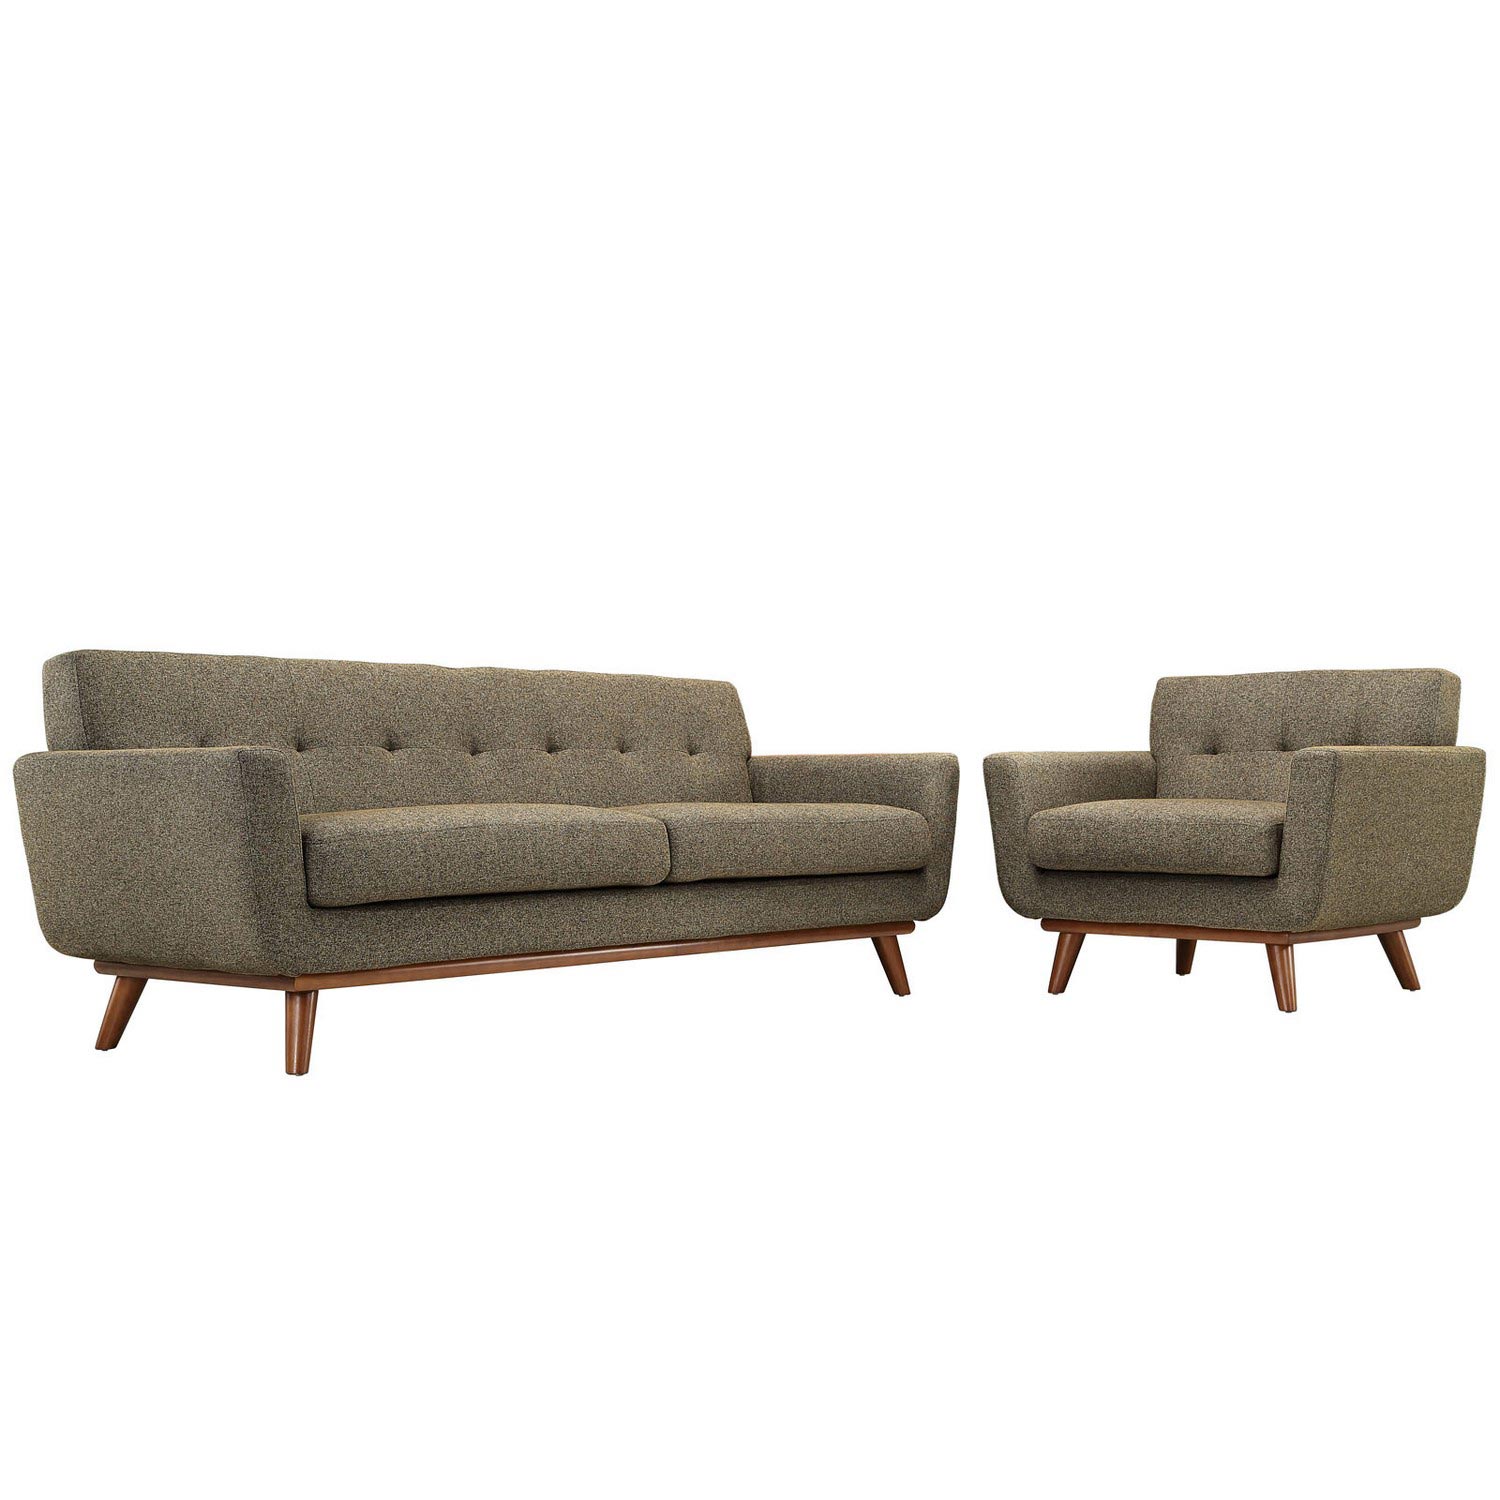 Modway Engage Armchair and Sofa Set of 2 - Oatmeal